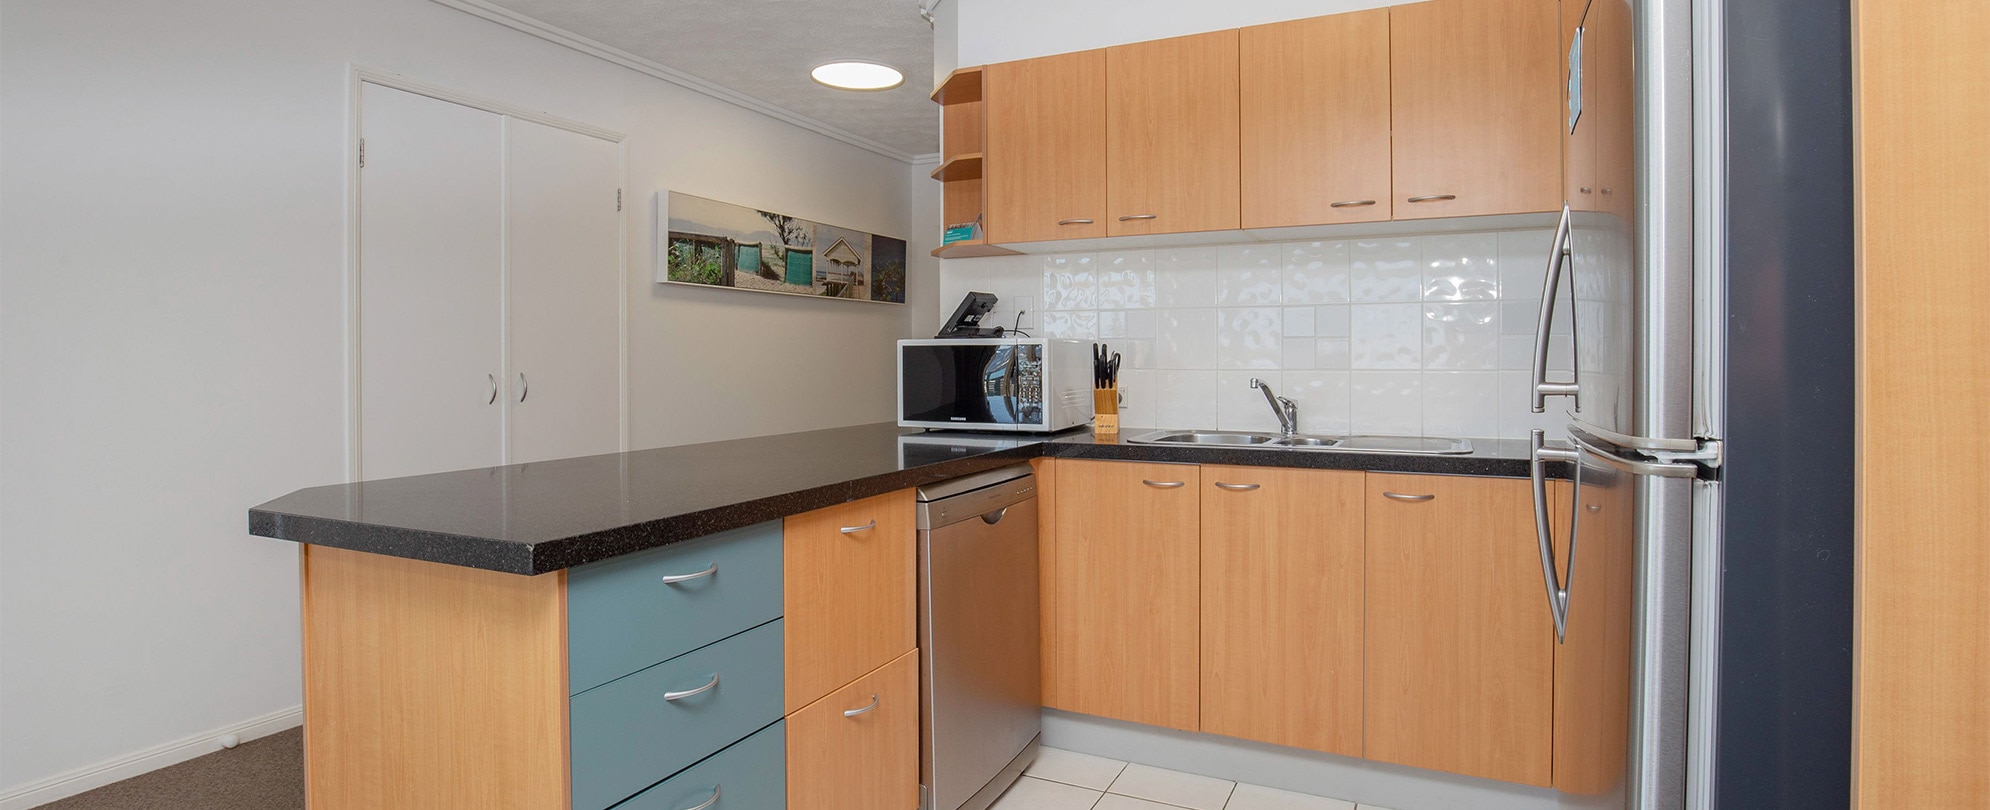 The kitchen of a Club Wyndham Kirra Beach standard suite with cabinets, a full fridge, microwave, sink, and dishwasher.